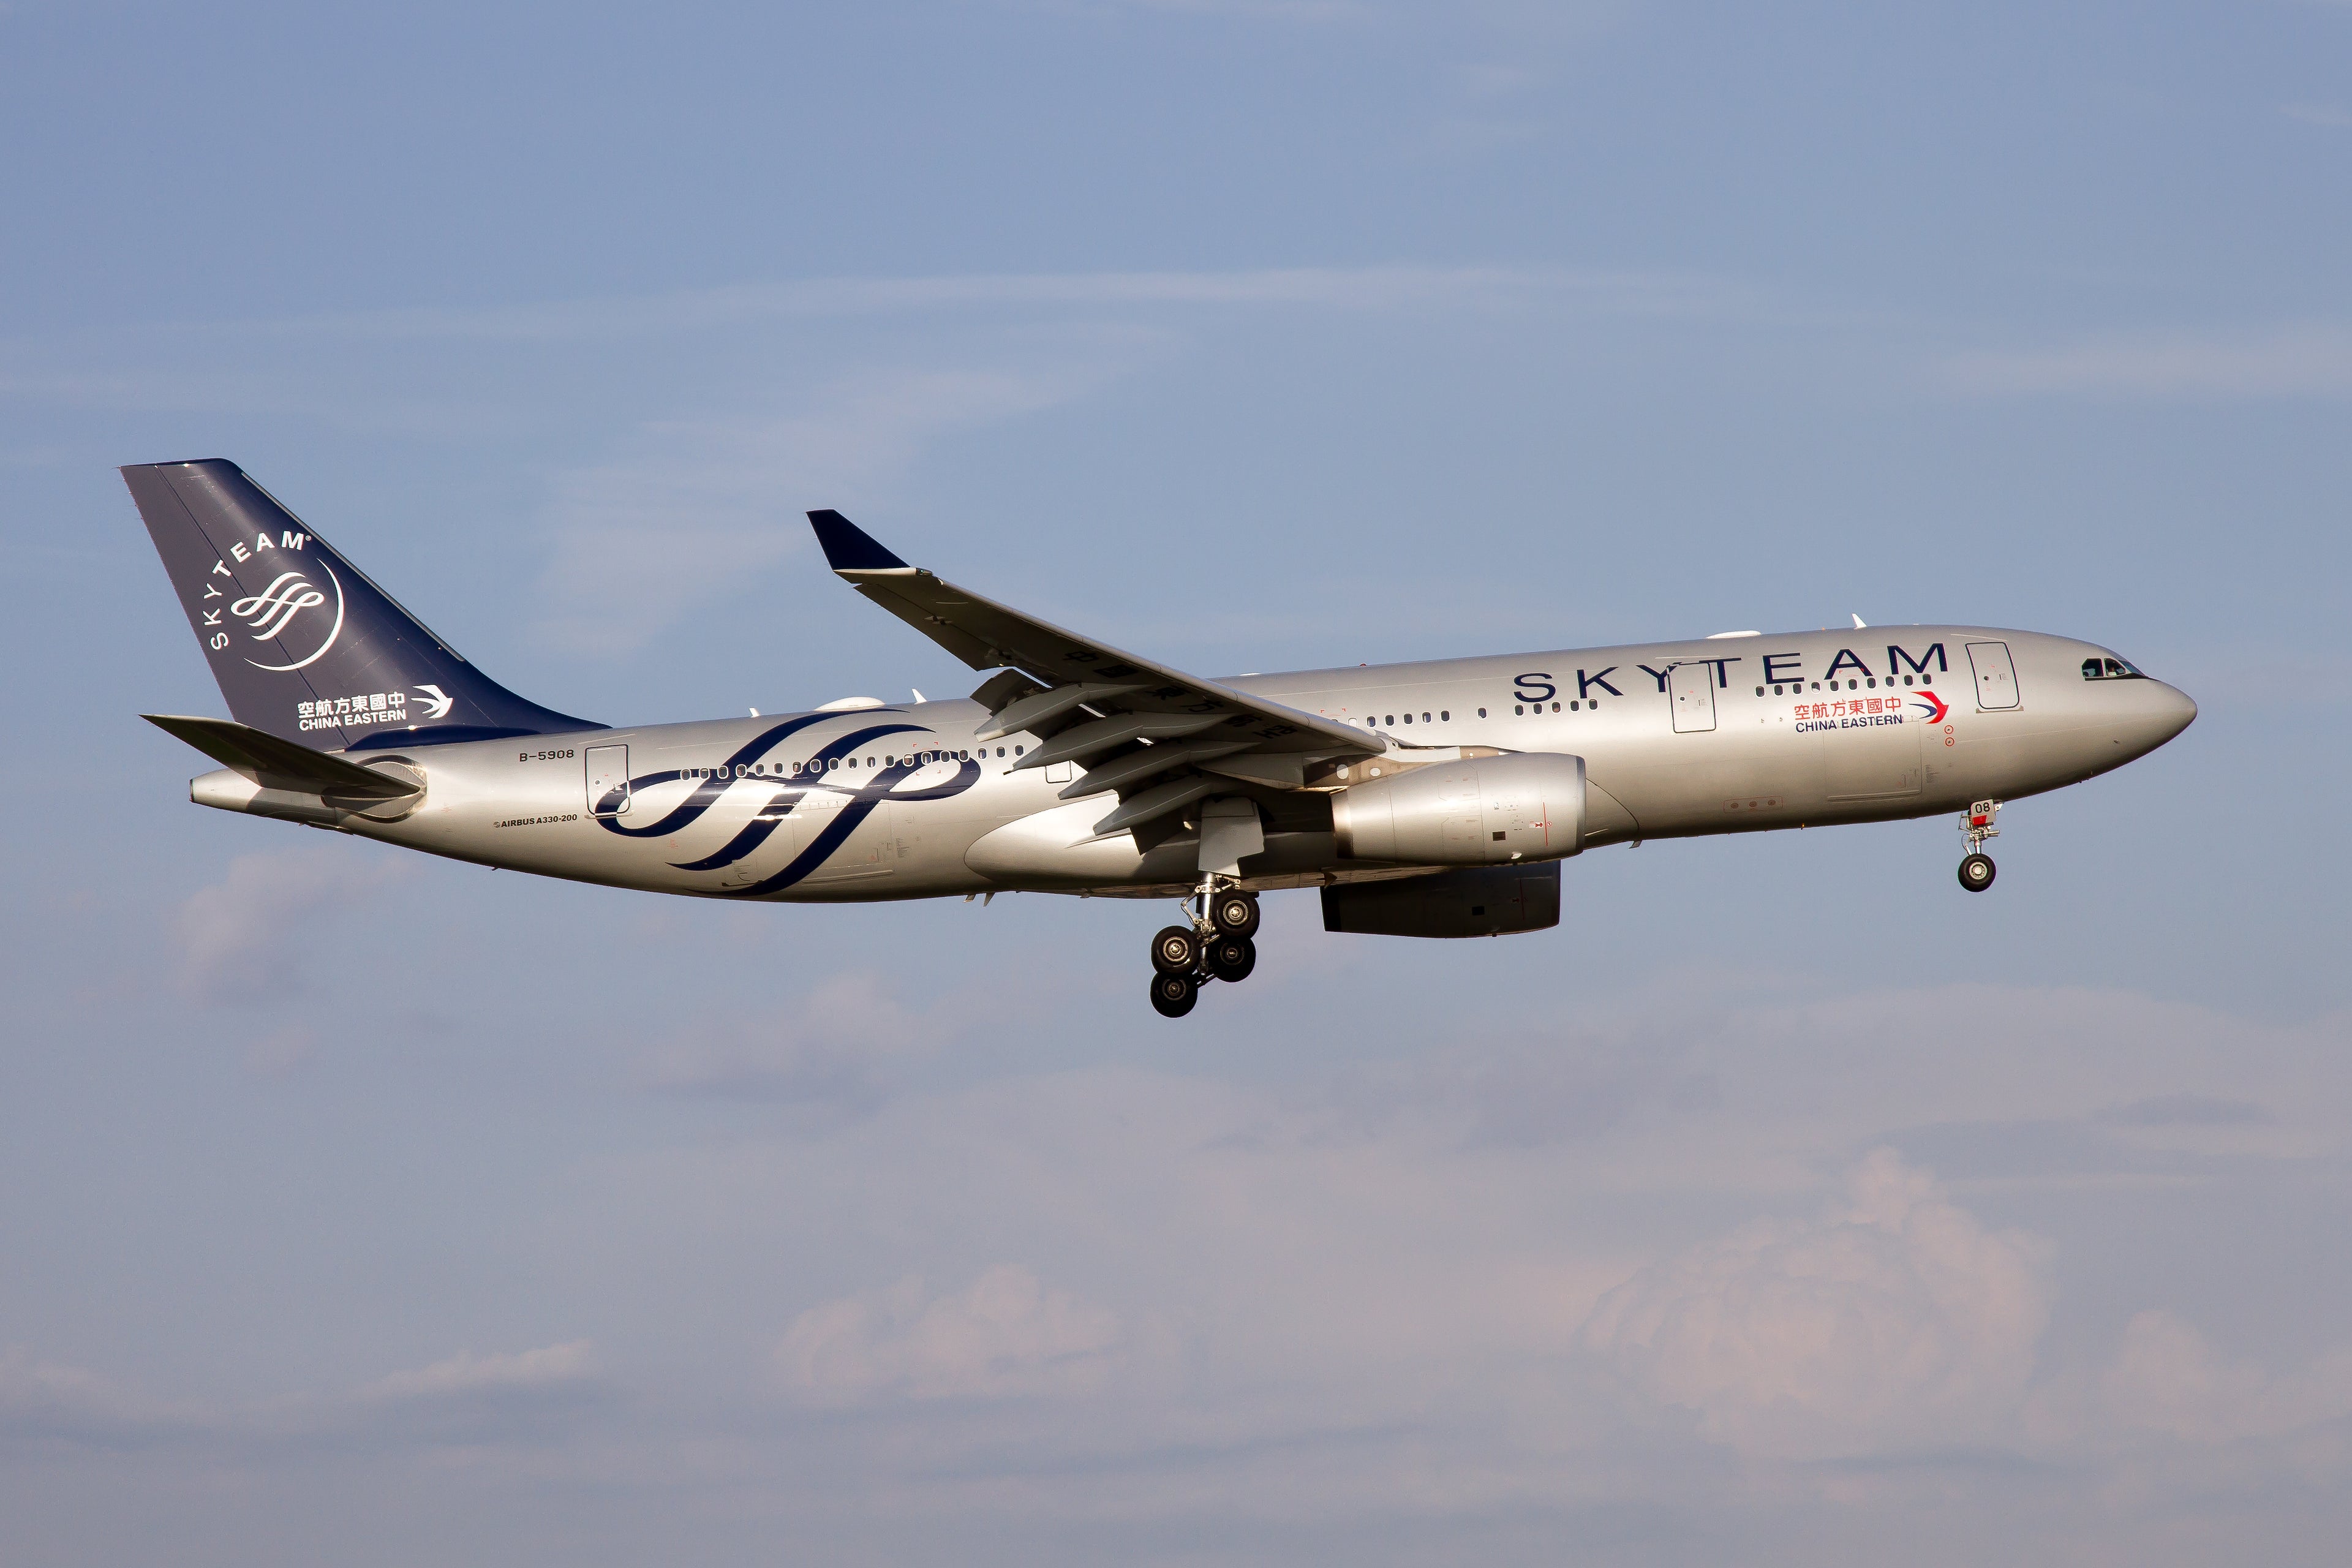 China Eastern Airlines Airbus 330-200 in Skyteam livery